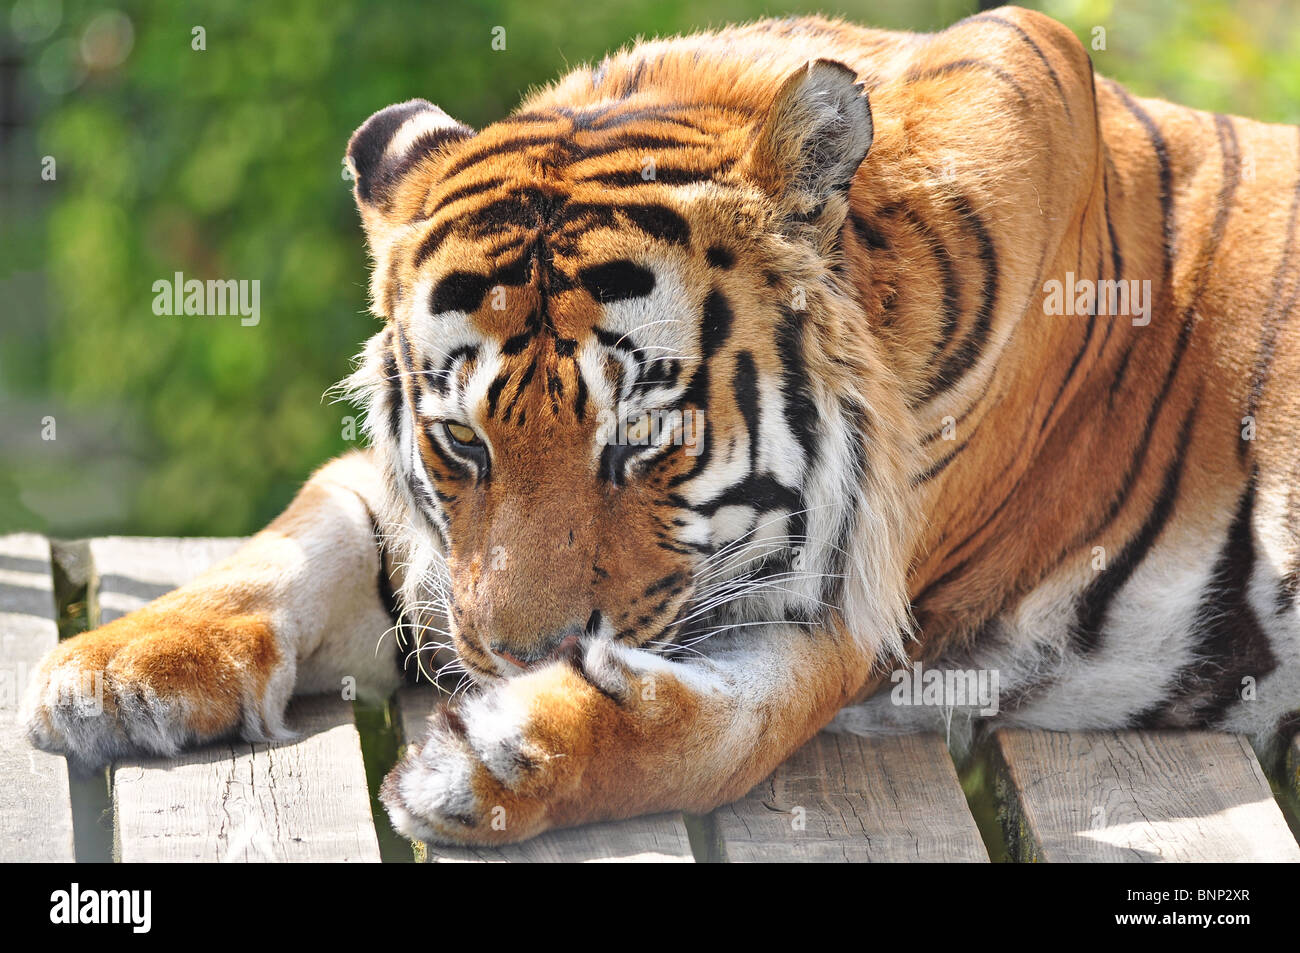 Bengal Tiger Licking Paw High Resolution Stock Photography and Images -  Alamy